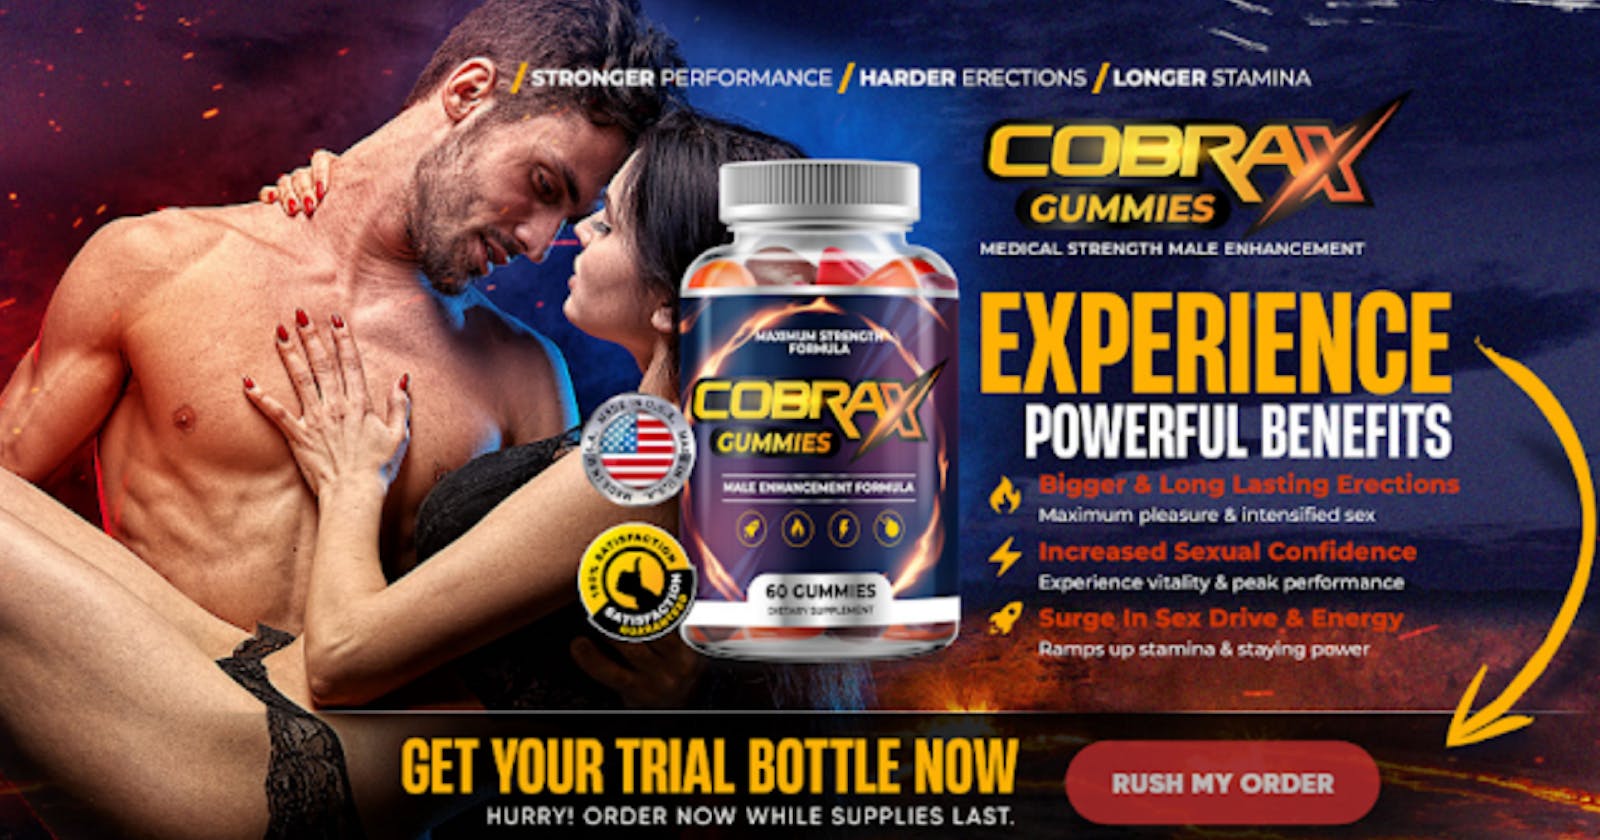 Cobra X Gummies 100% Pure & Natural With Great Result?